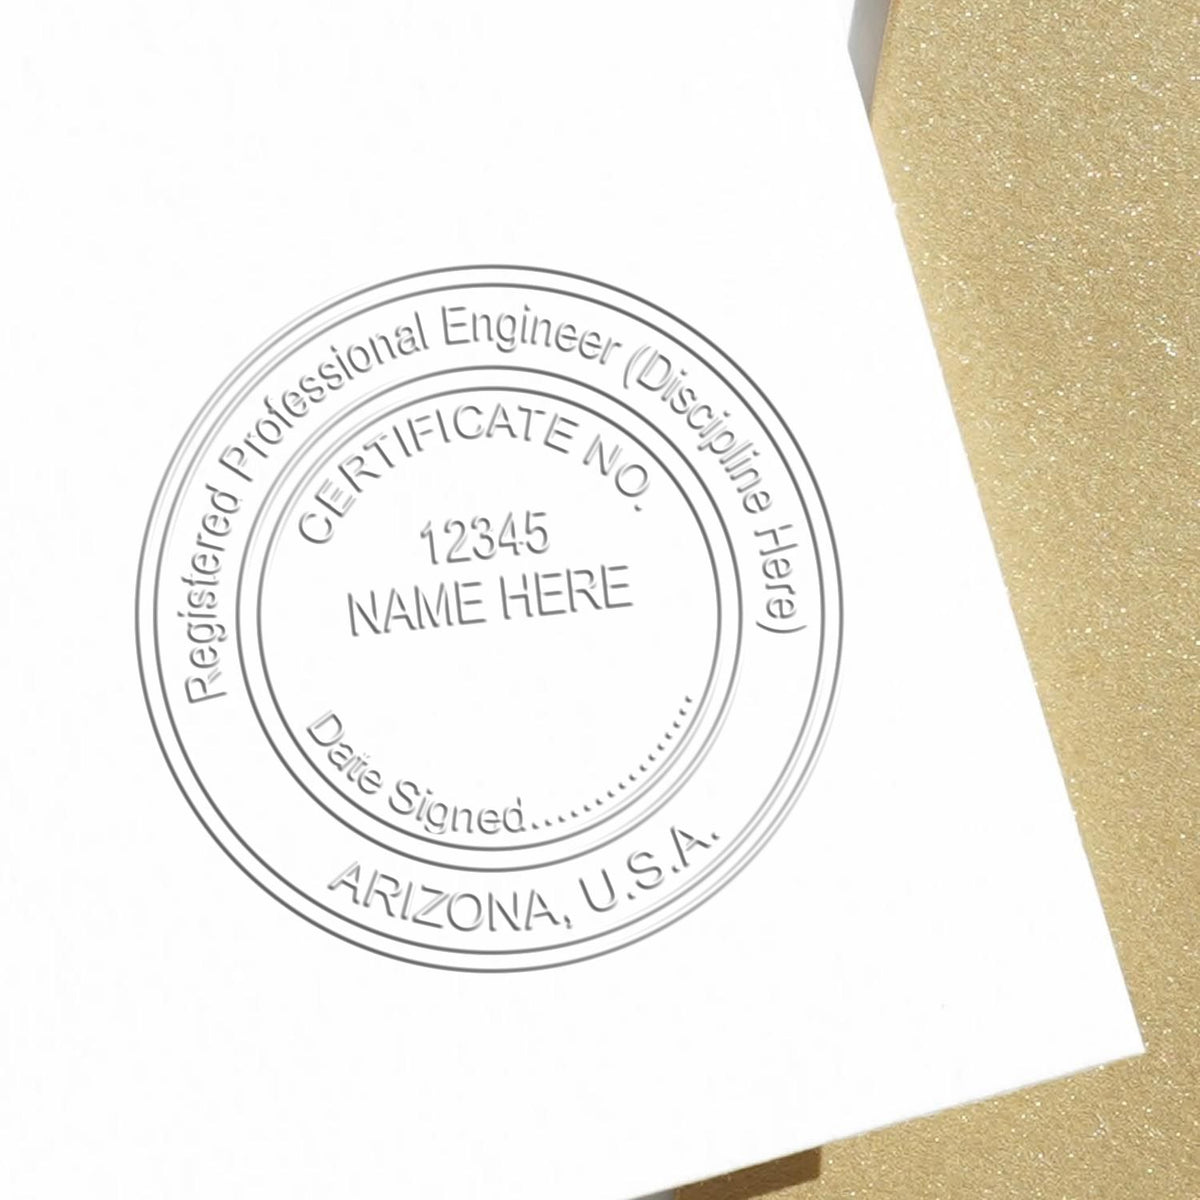 The State of Arizona Extended Long Reach Engineer Seal stamp impression comes to life with a crisp, detailed photo on paper - showcasing true professional quality.